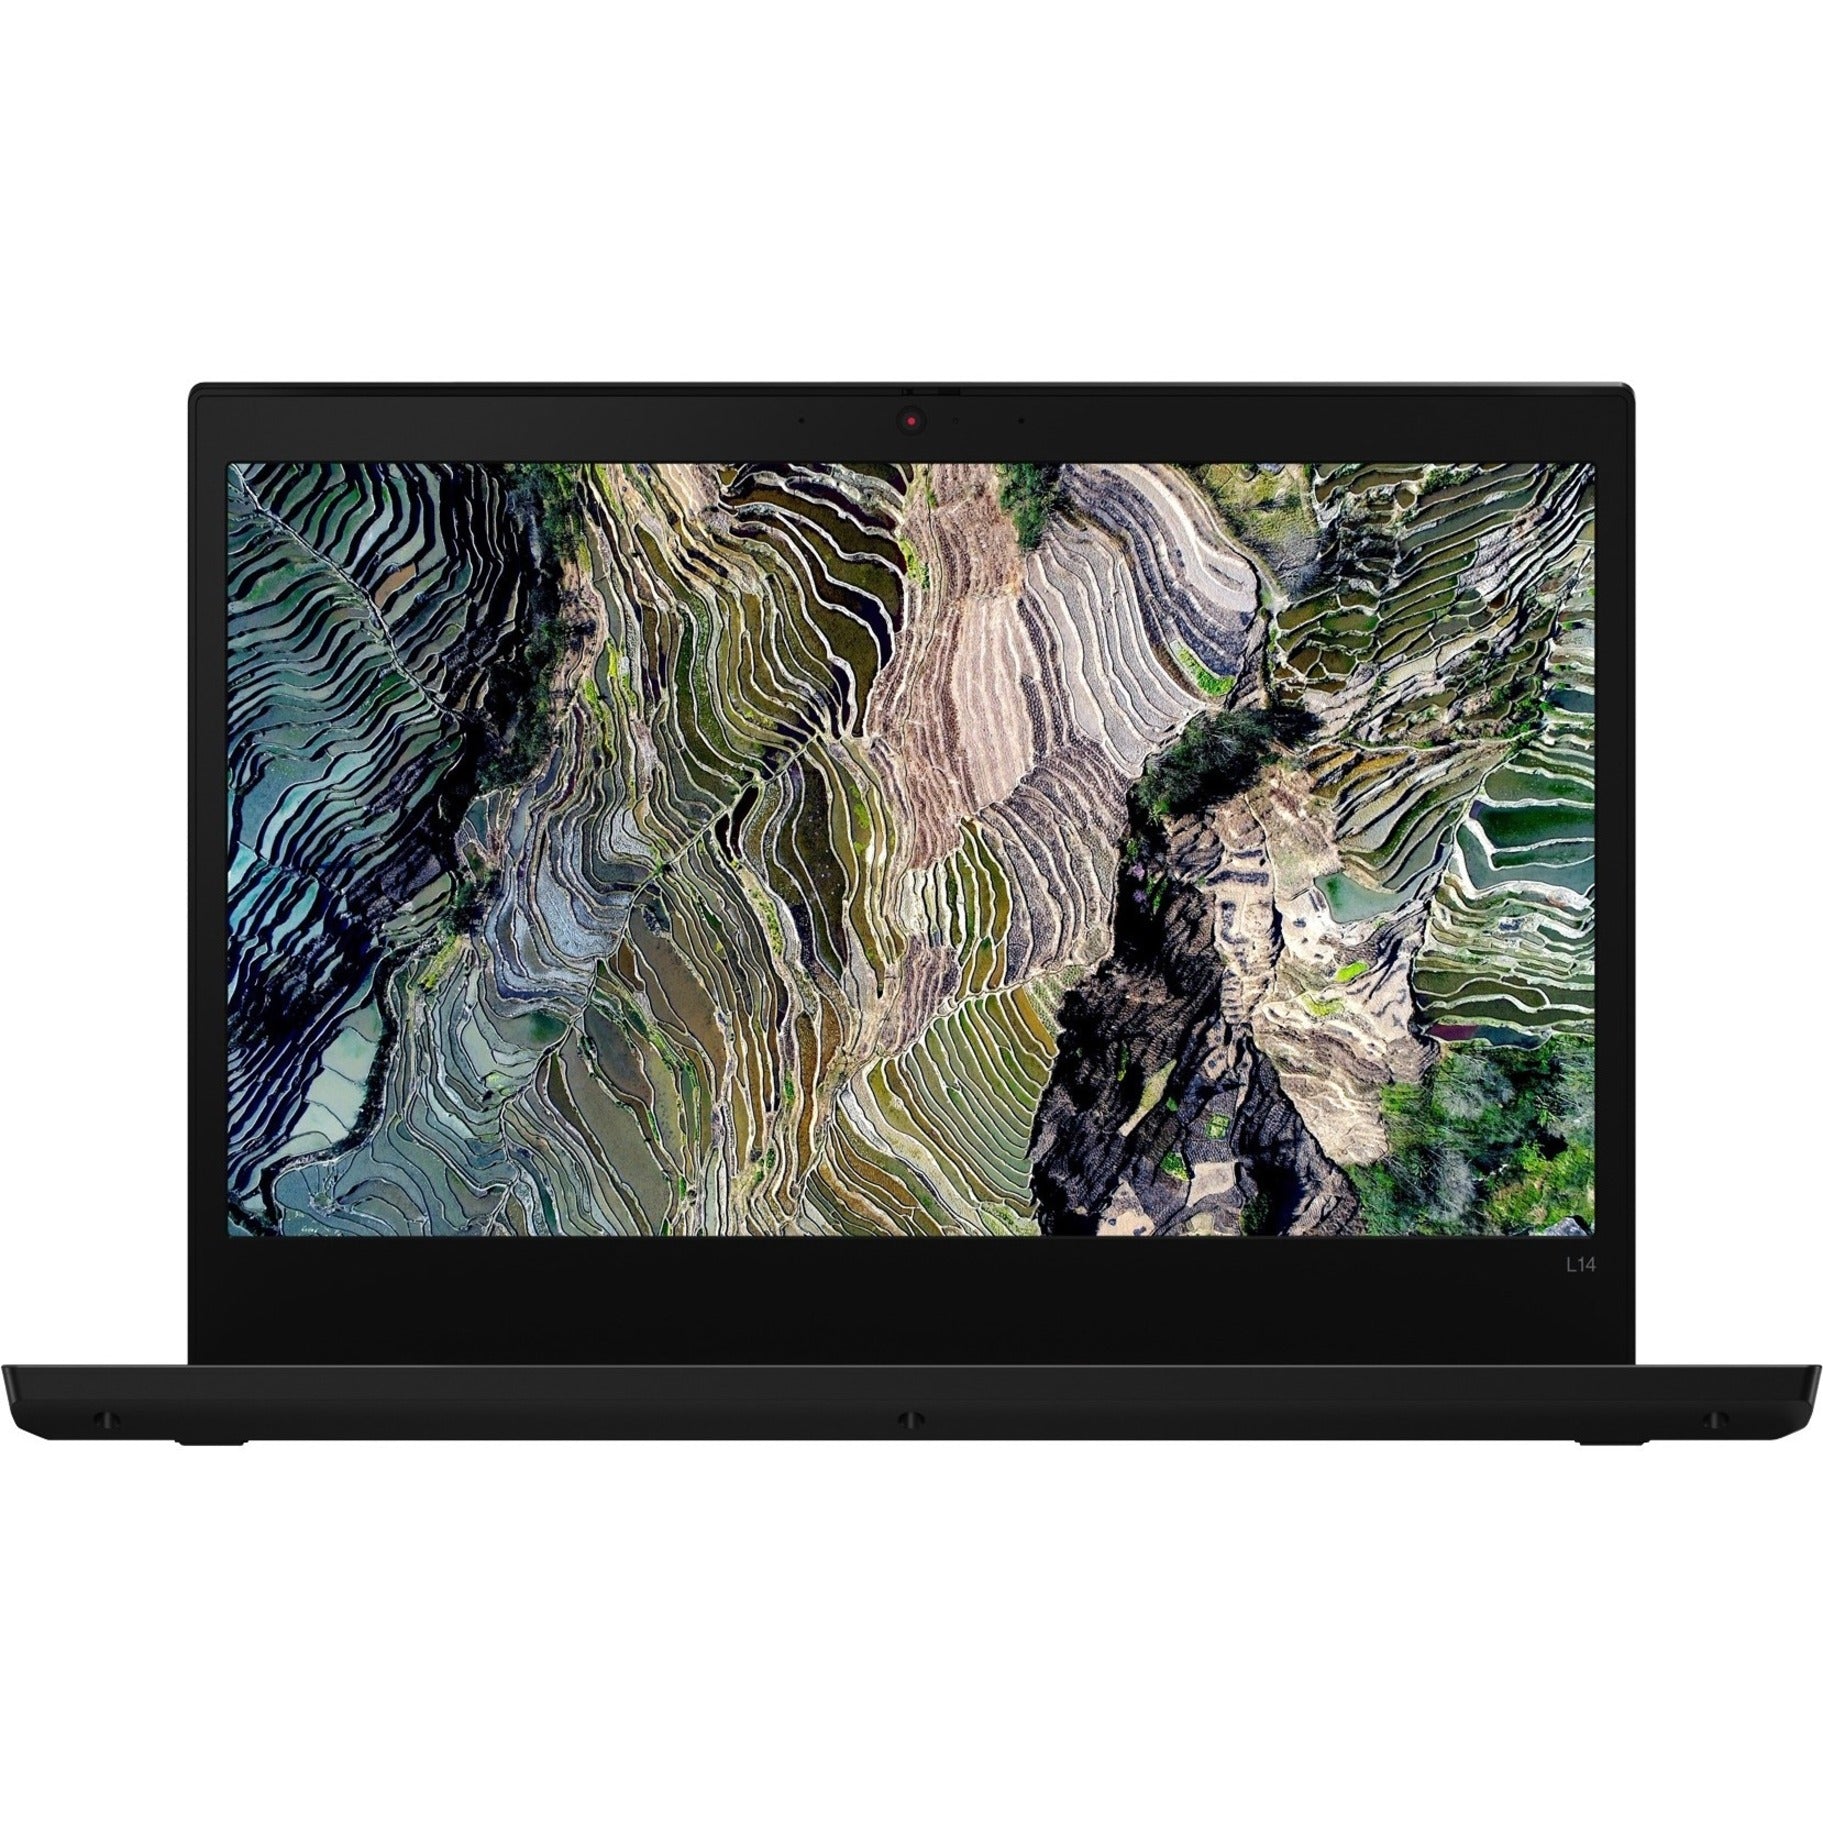 Lenovo ThinkPad L14 Gen2 20X100GCUS 14" Touchscreen Notebook - Full HD - 1920 x 1080 - Intel Core i5 11th Gen i5-1135G7 Quad-core (4 Core) 2.4GHz - 8GB Total RAM - 256GB SSD - Black - no ethernet port - not compatible with mechanical docking stations, only supports cable docking Main image